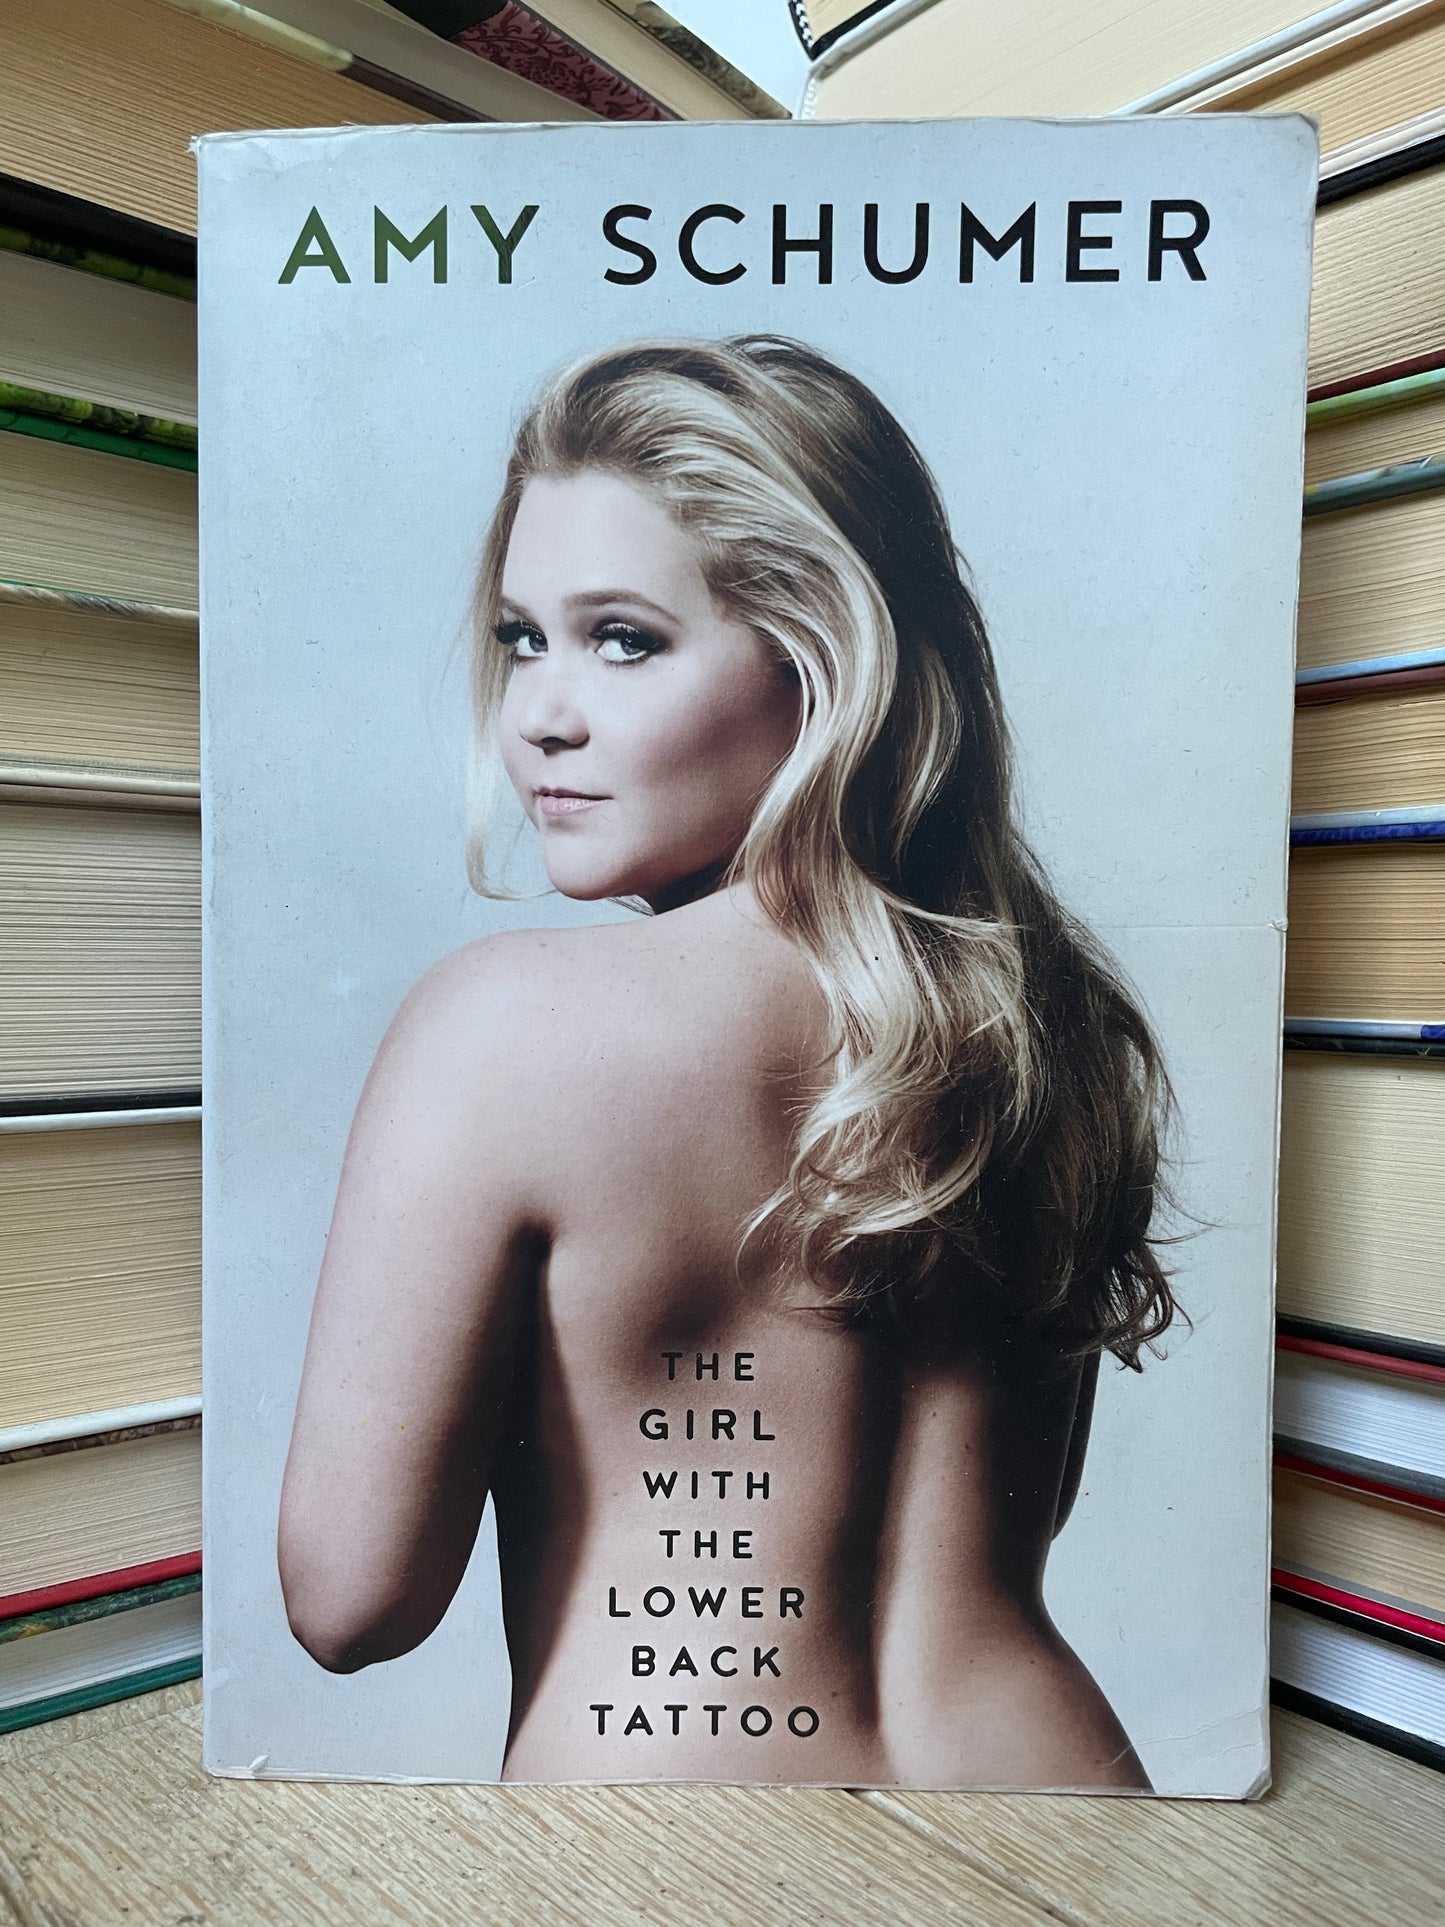 Amy Schumer - The Girl With the Lower Back Tattoo